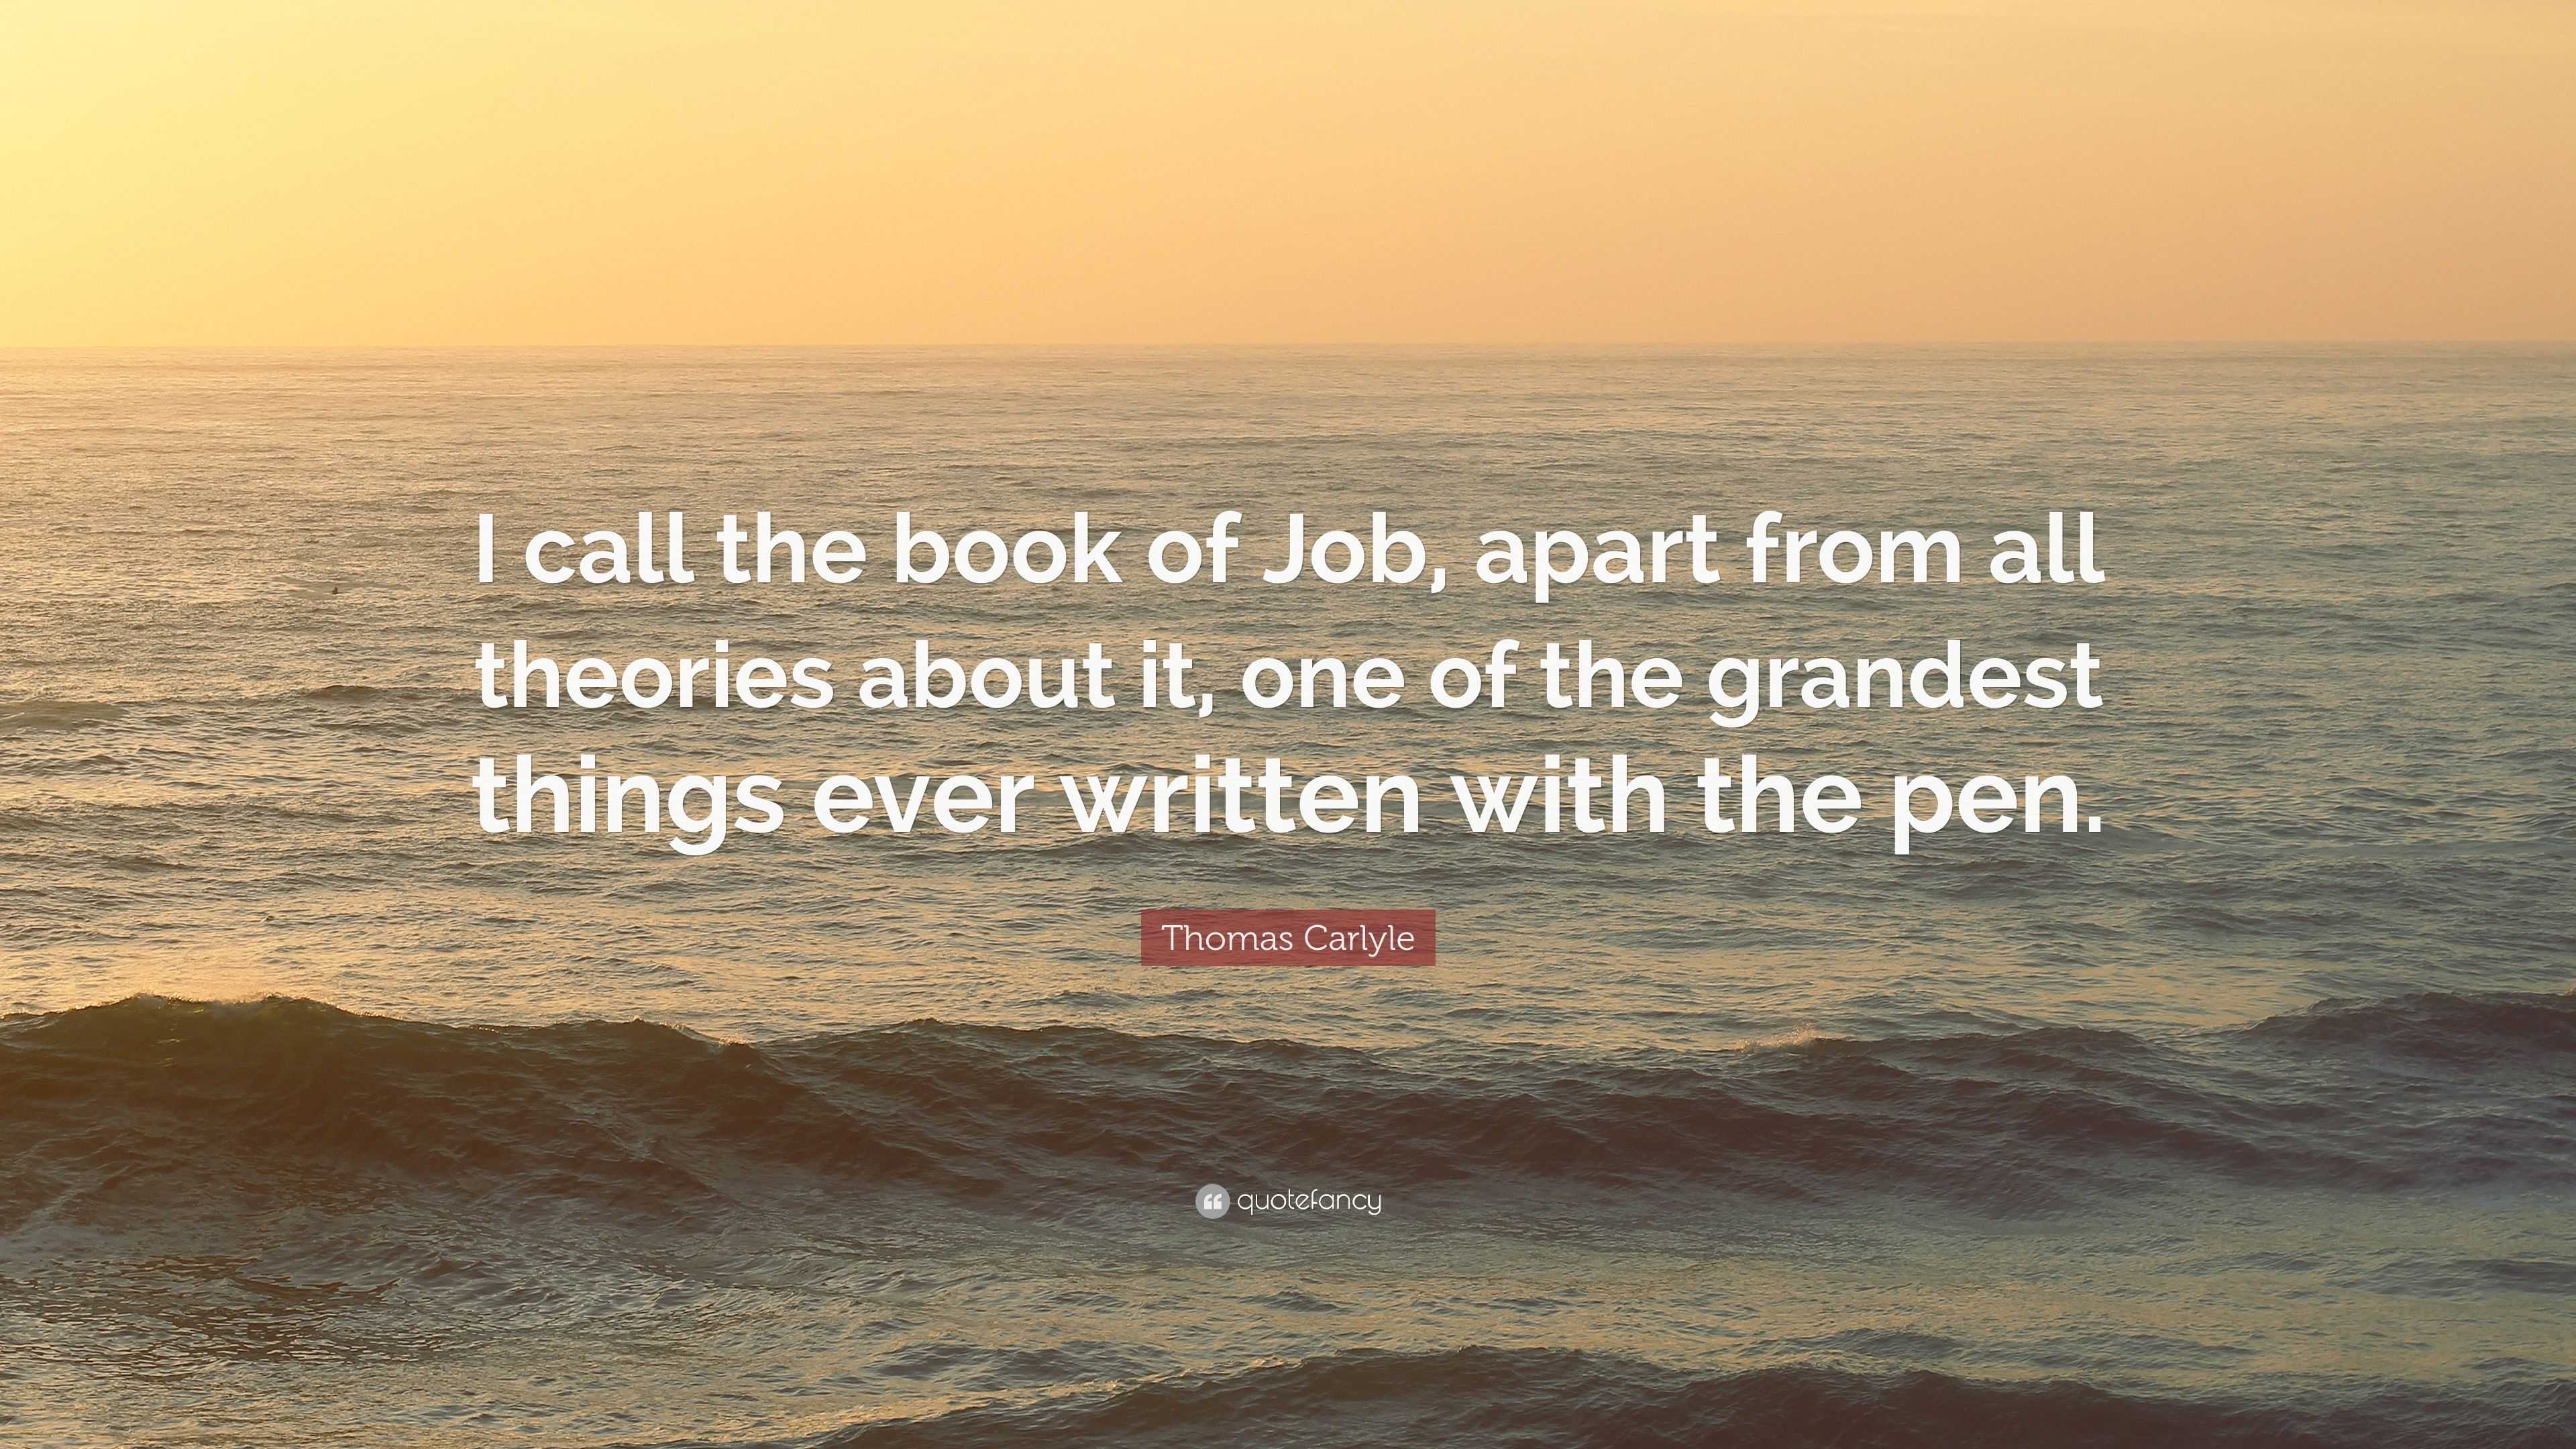 Thomas Carlyle Quote: “I call the book of Job, apart from all theories